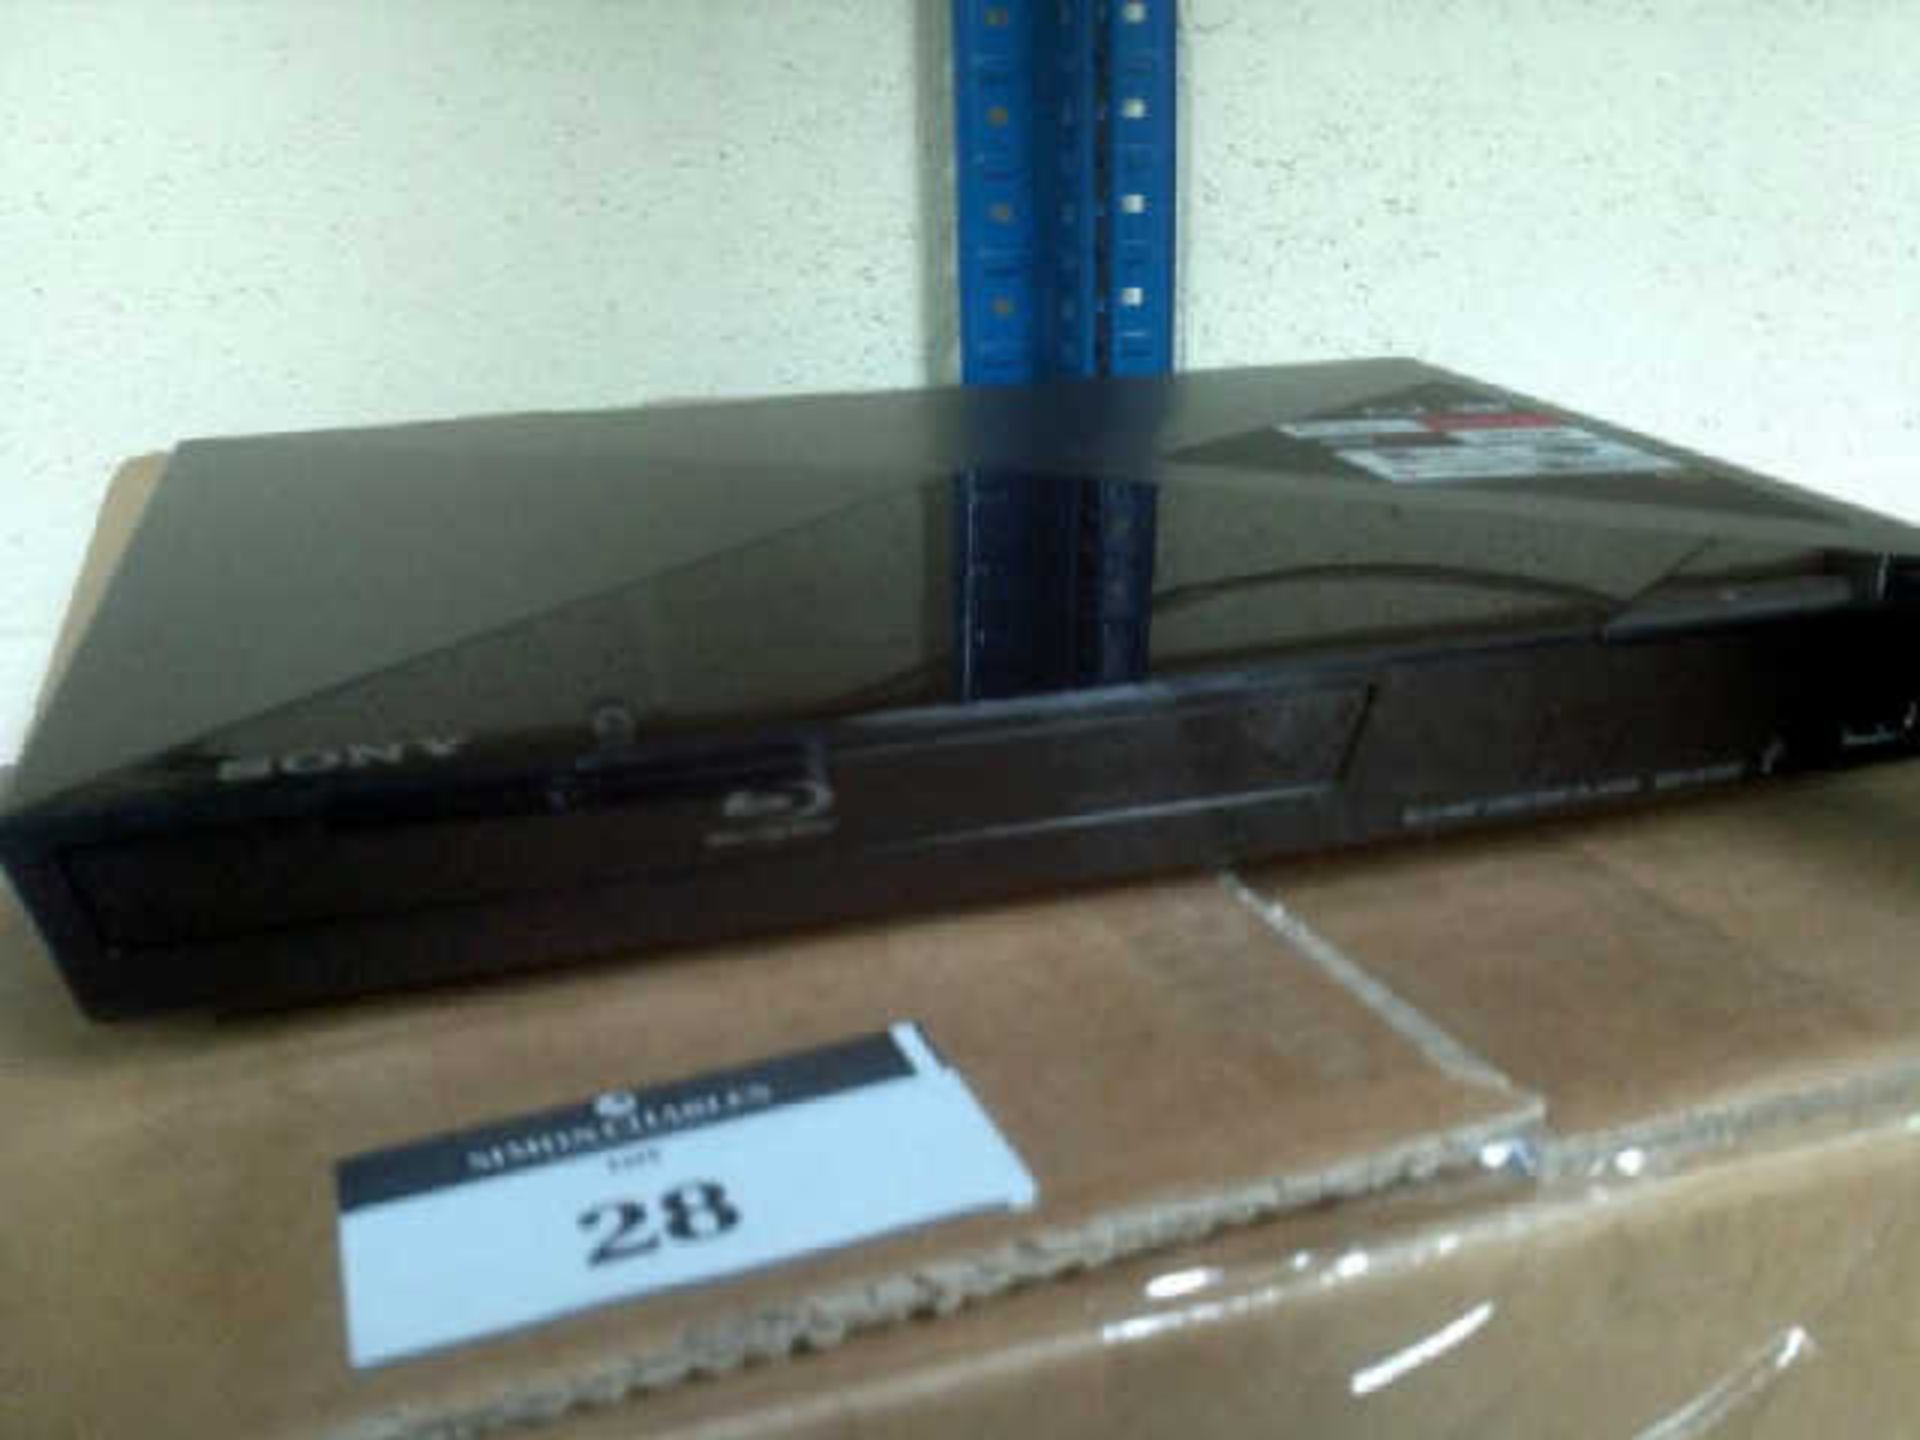 SONY BDP-S1200 SMART BLU-RAY DISC PLAYER